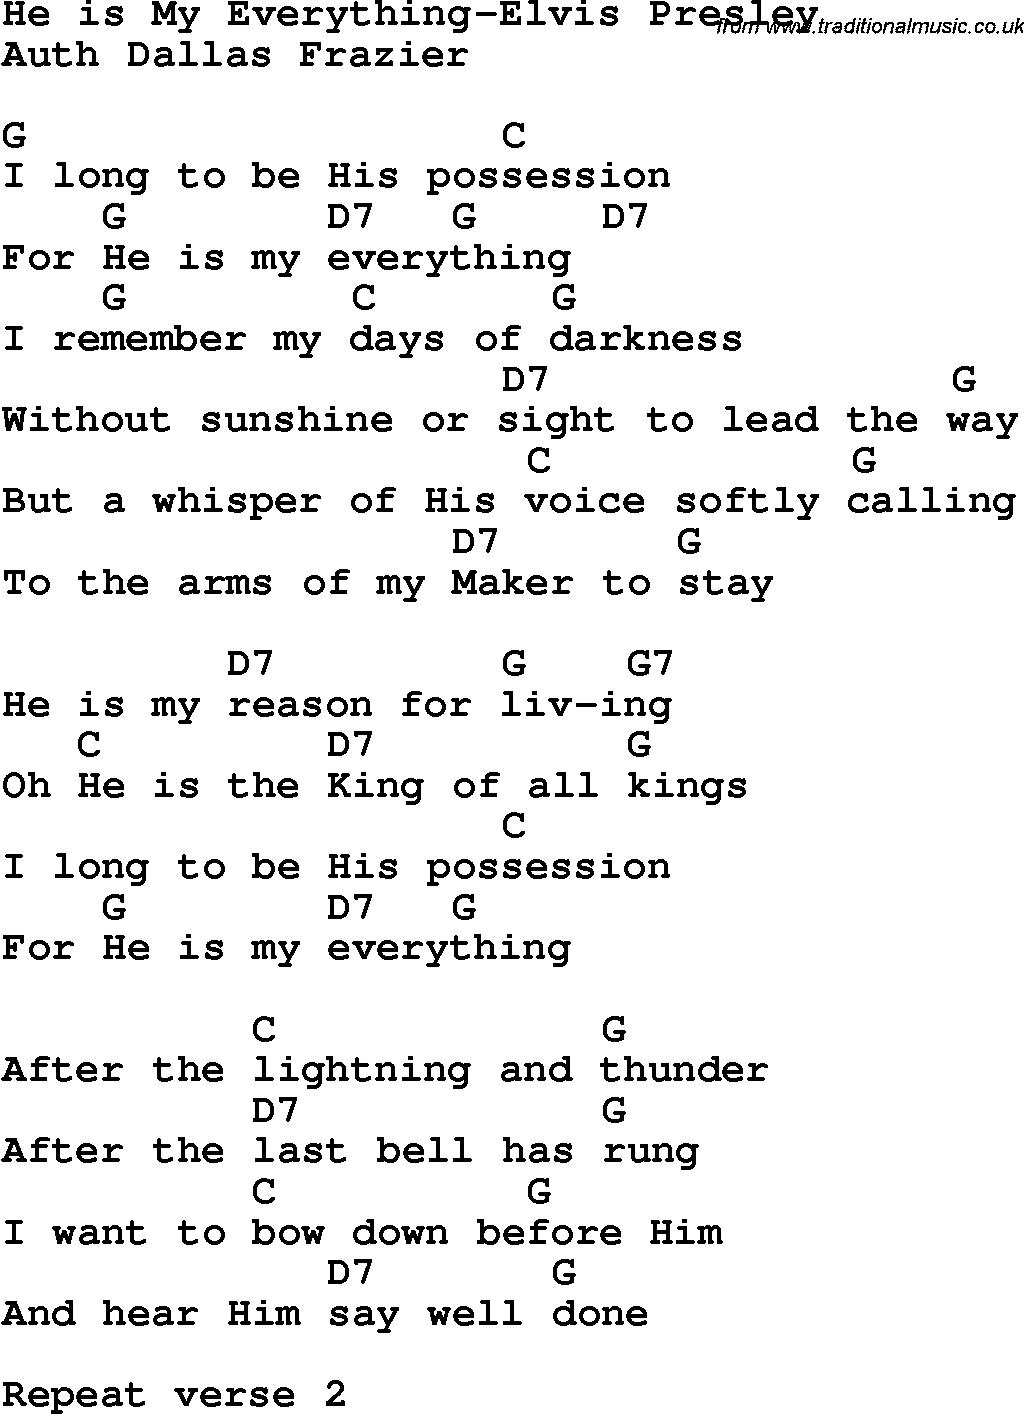 Country, Southern and Bluegrass Gospel Song He is My Everything-Elvis Presley lyrics and chords